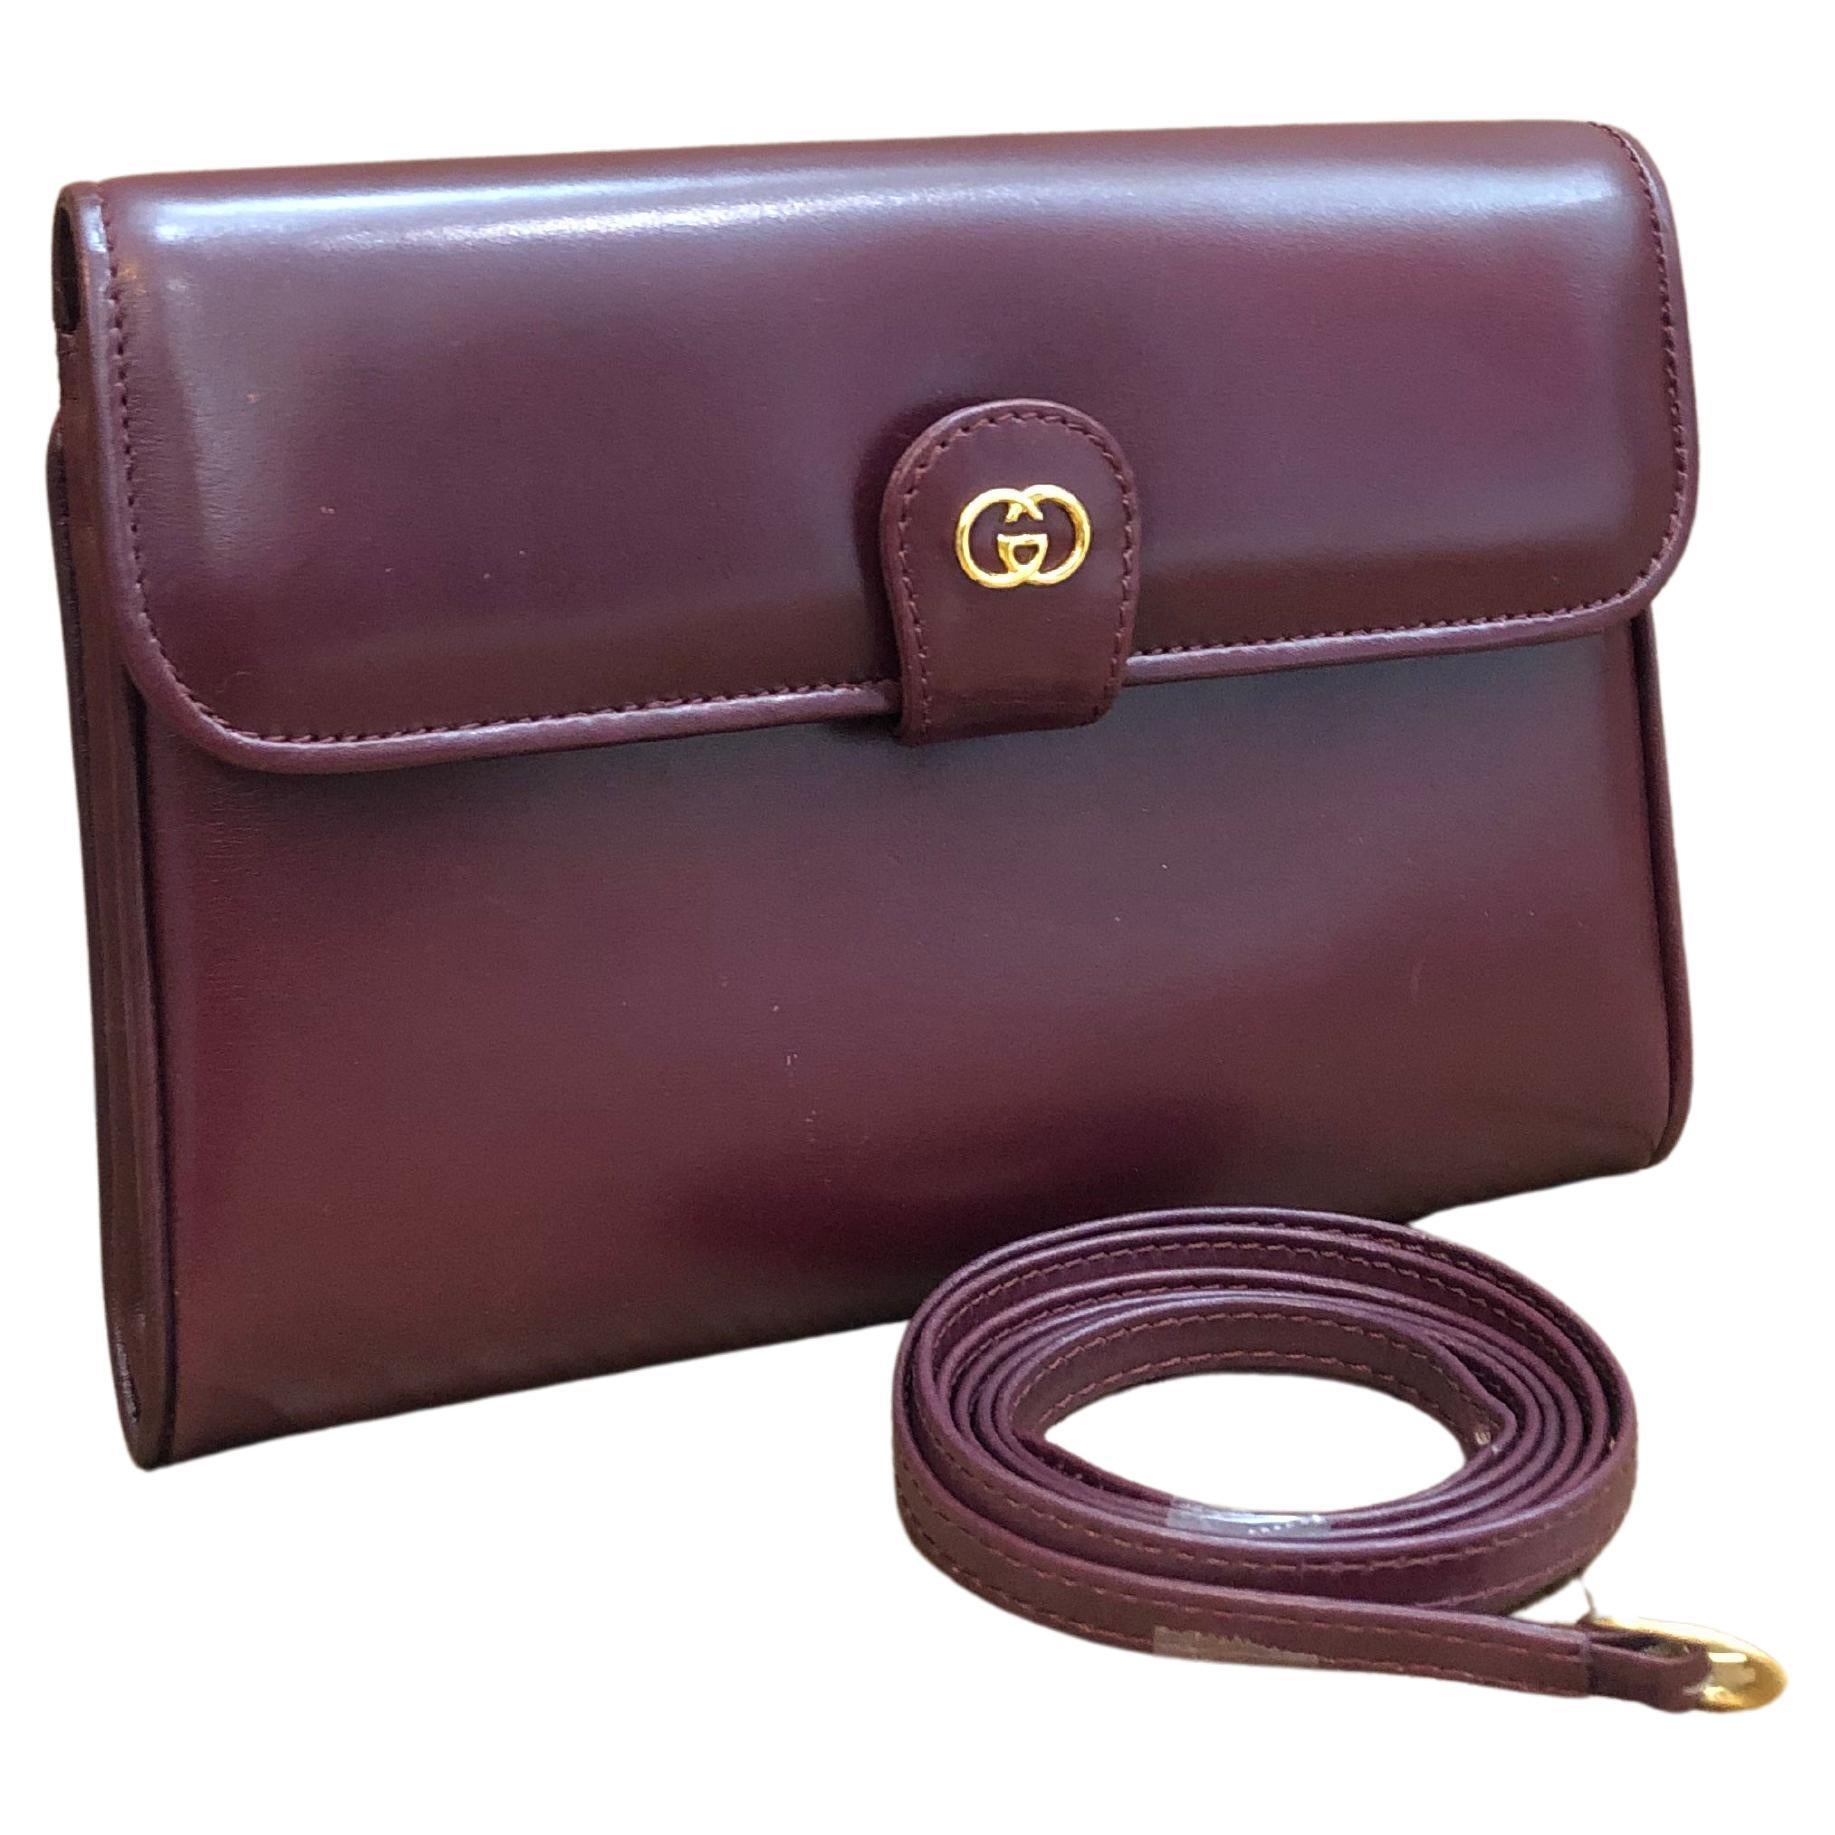 1980s Vintage GUCCI Leather Two-Way Clutch Crossbody Bag Burgundy 